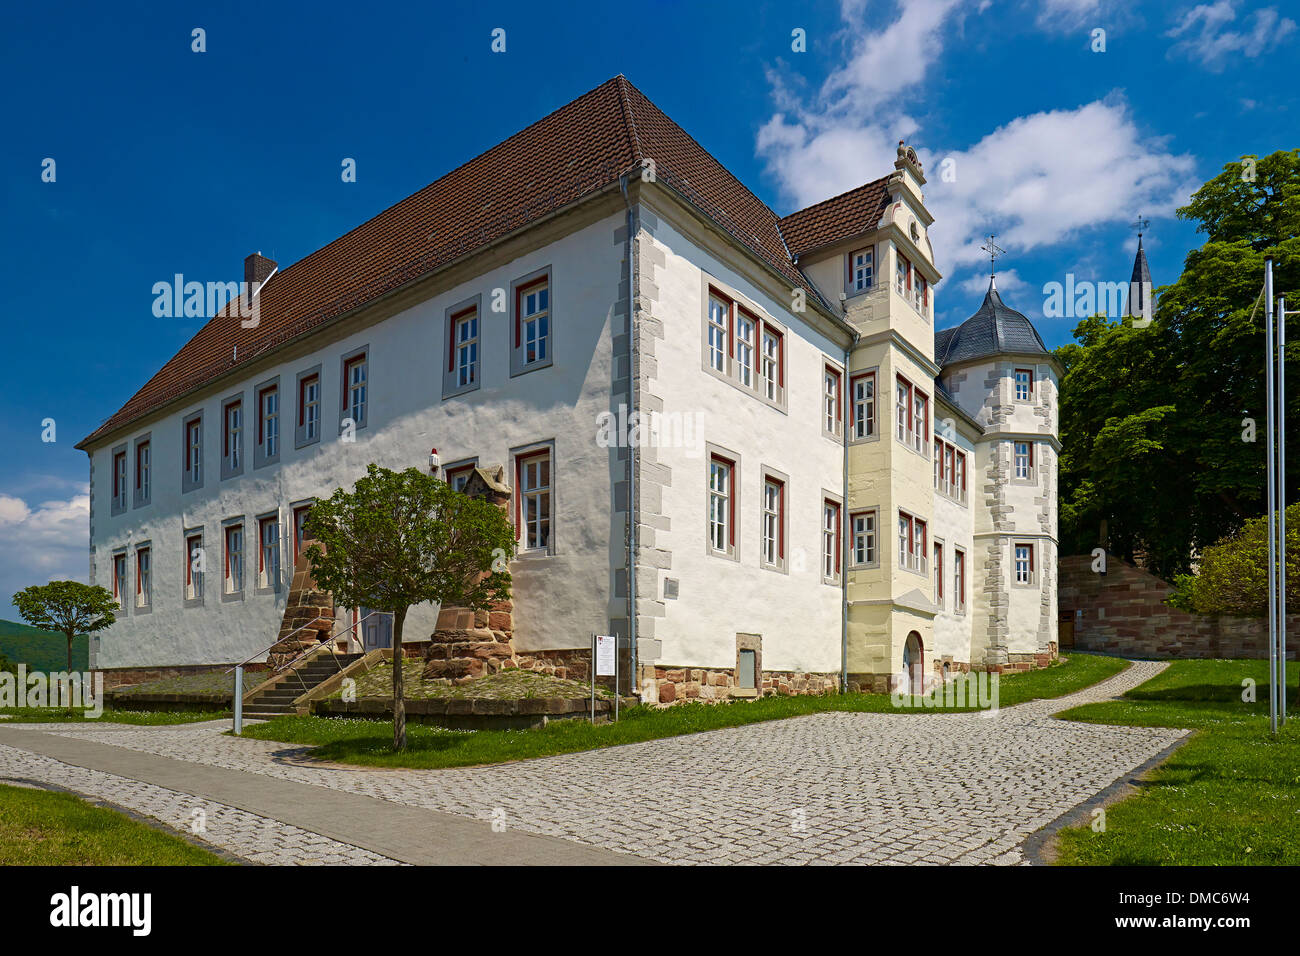 Wedding house in the old town of Eschwege, Werra-Meissner district, Hesse, Germany Stock Photo